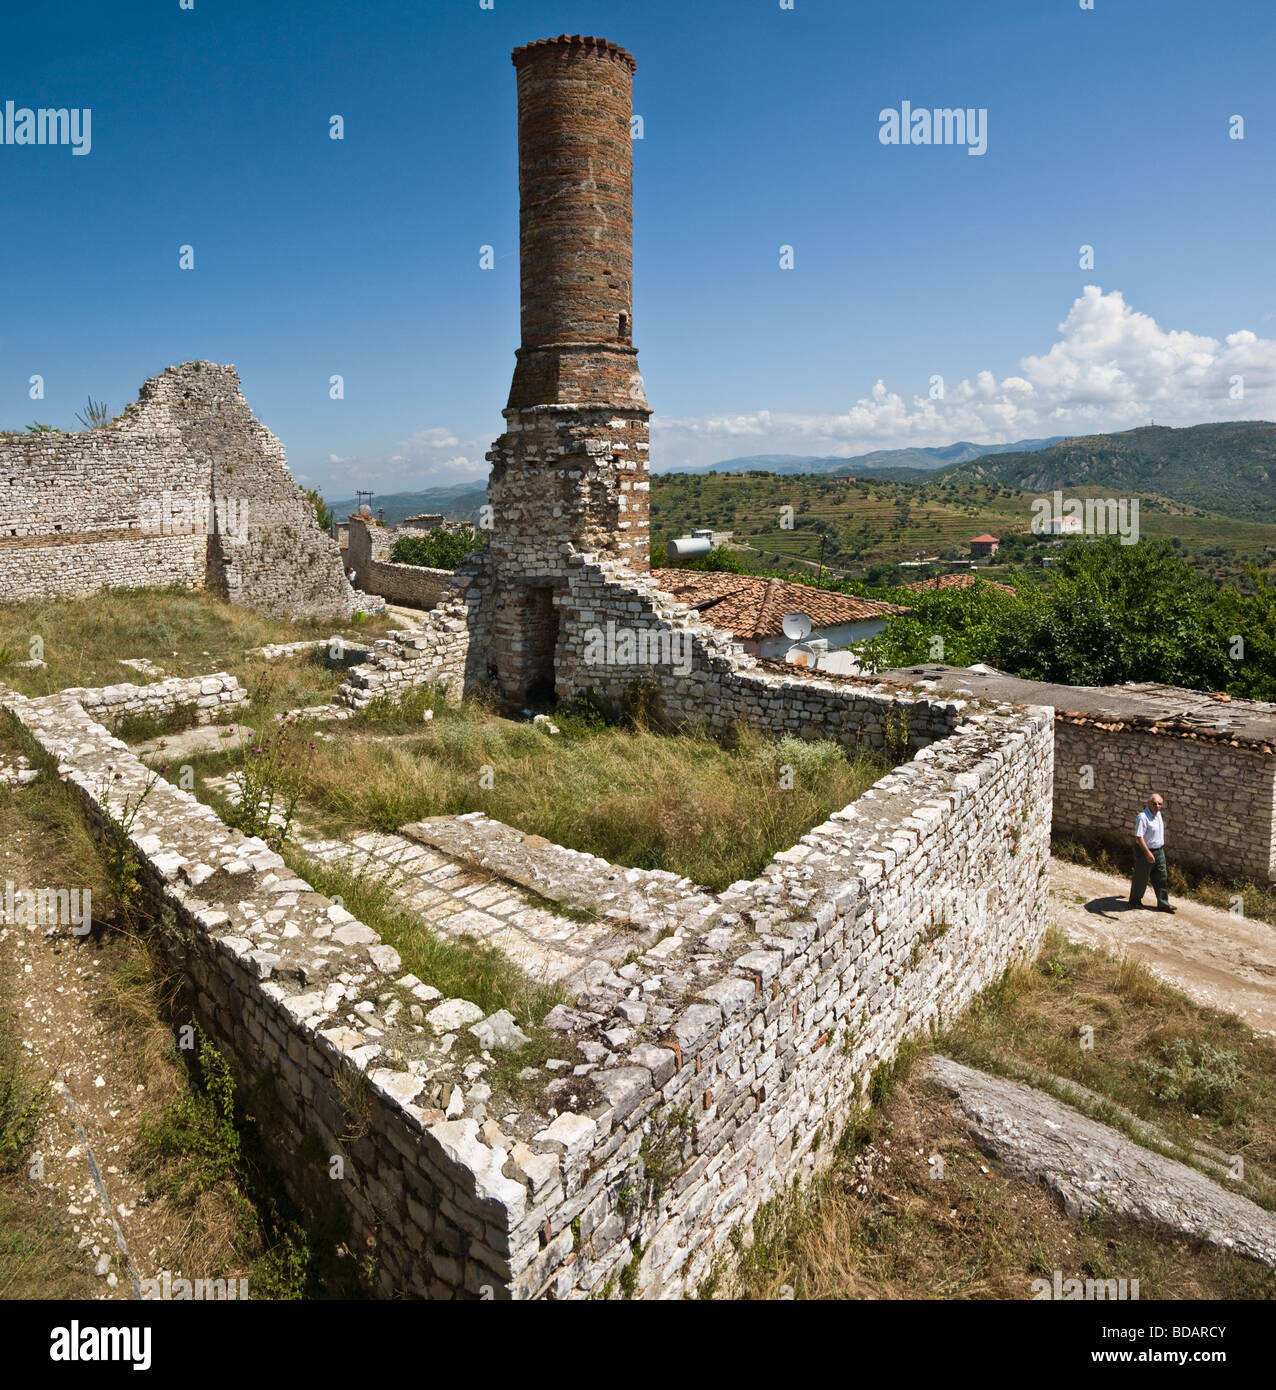 The ruins of the 15th century red mosque in the citadel above the old town of Berat in in central Albania Stock Photo